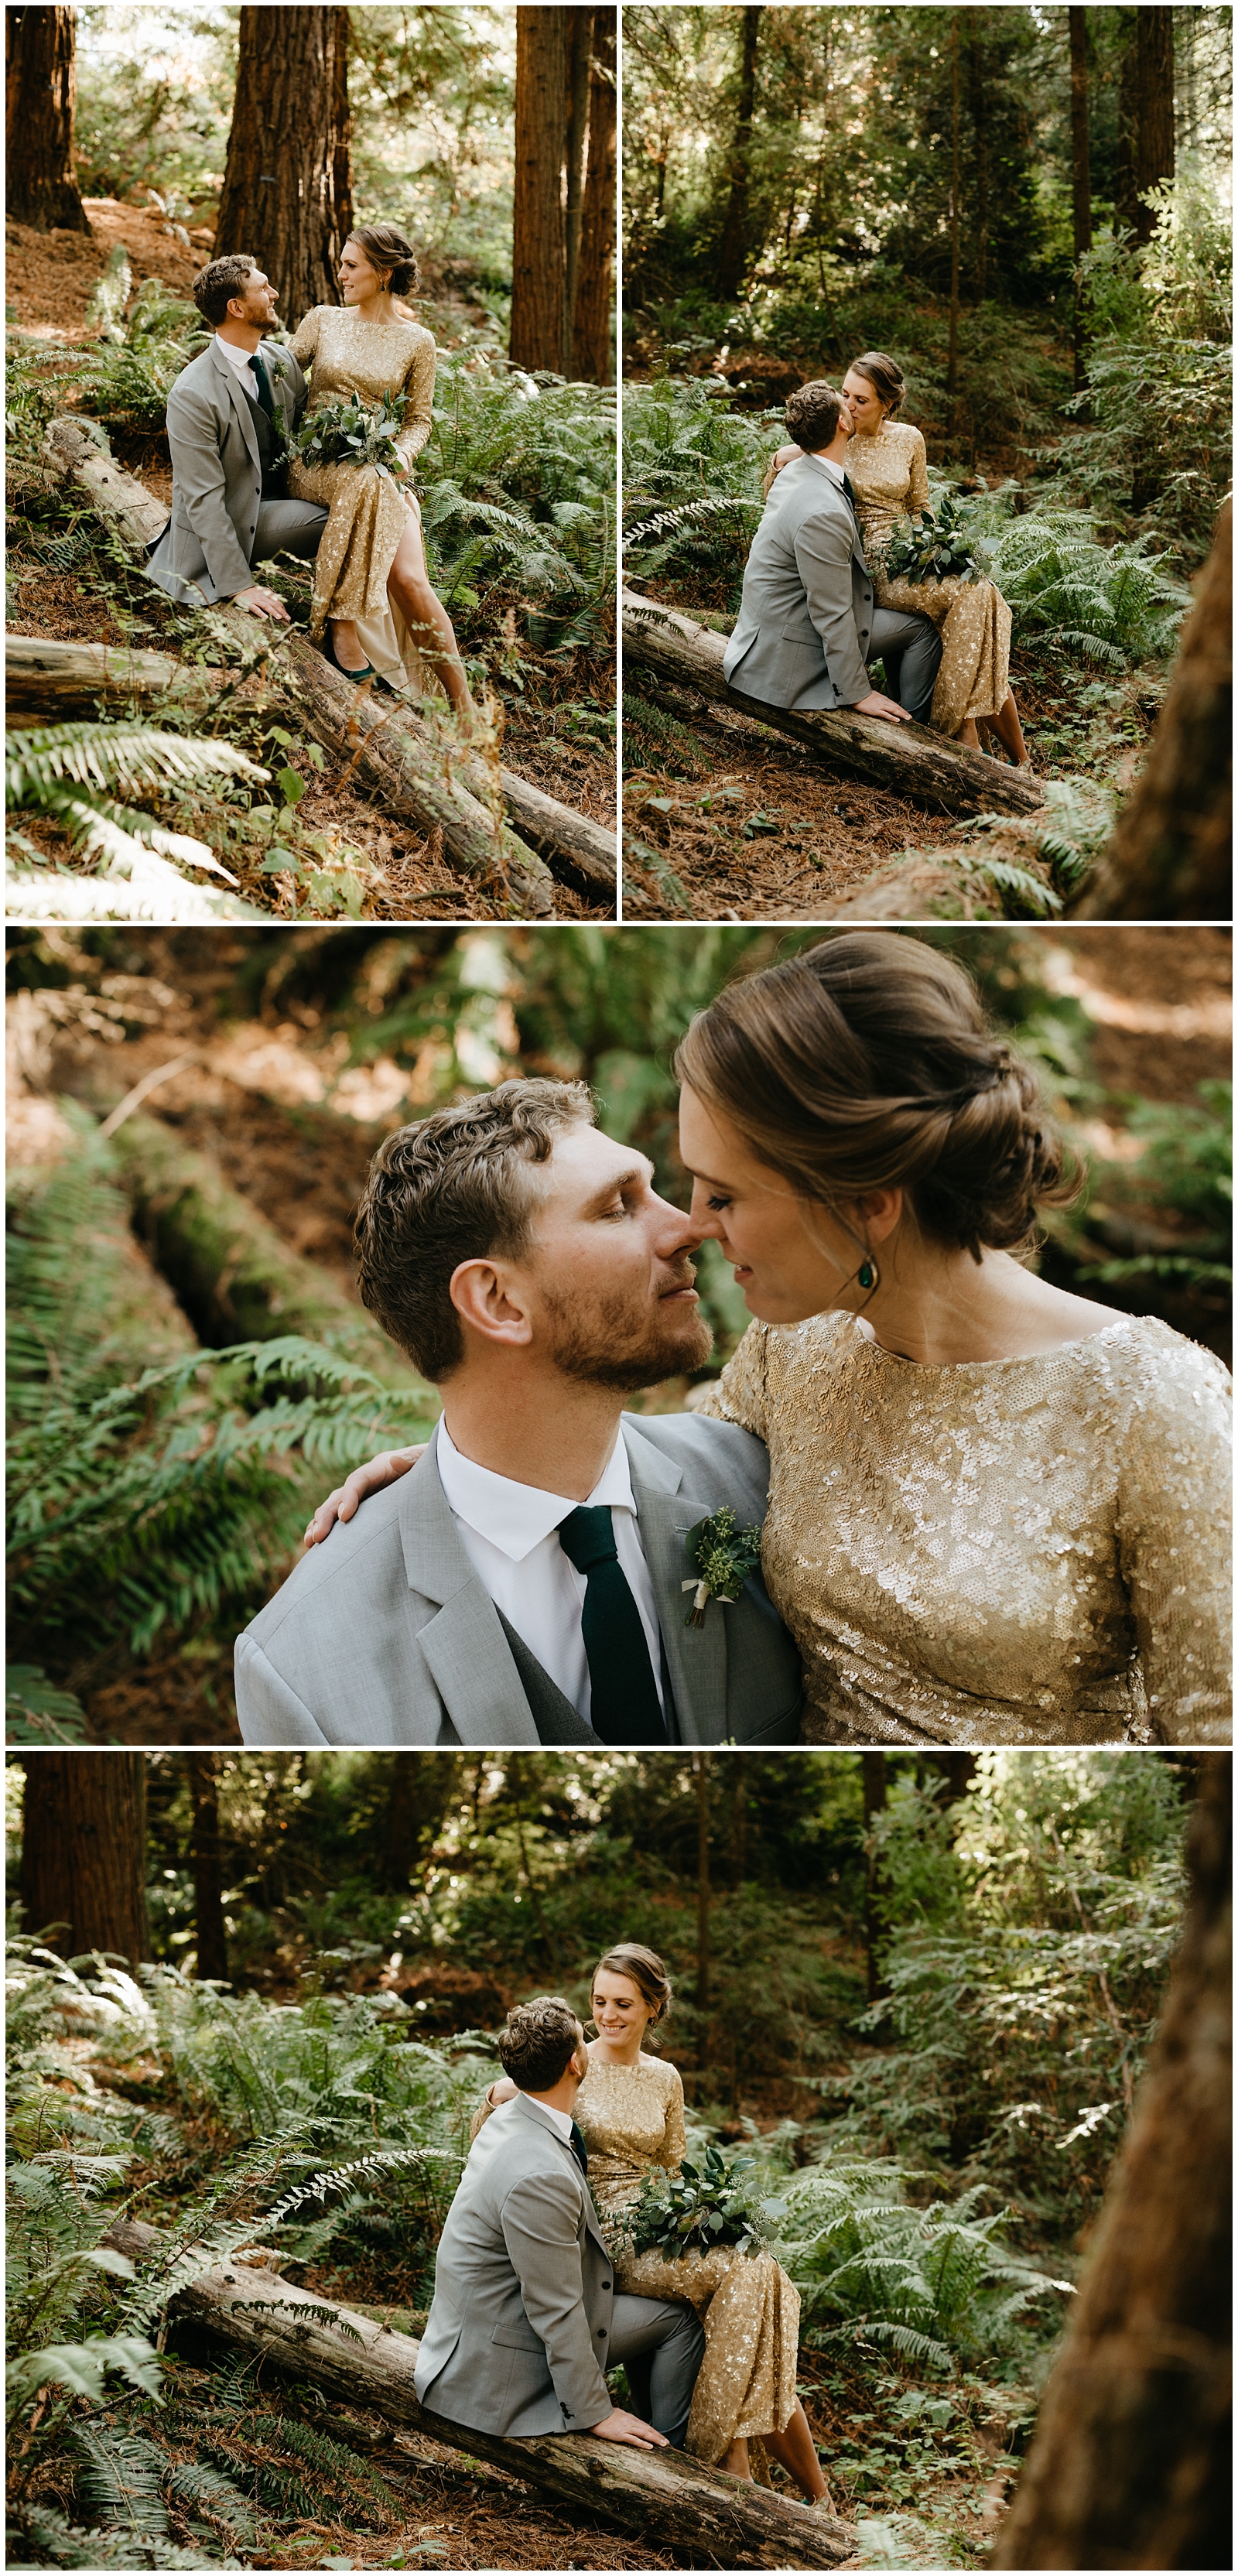 Elopement in the forest under redwood trees in a gold dress